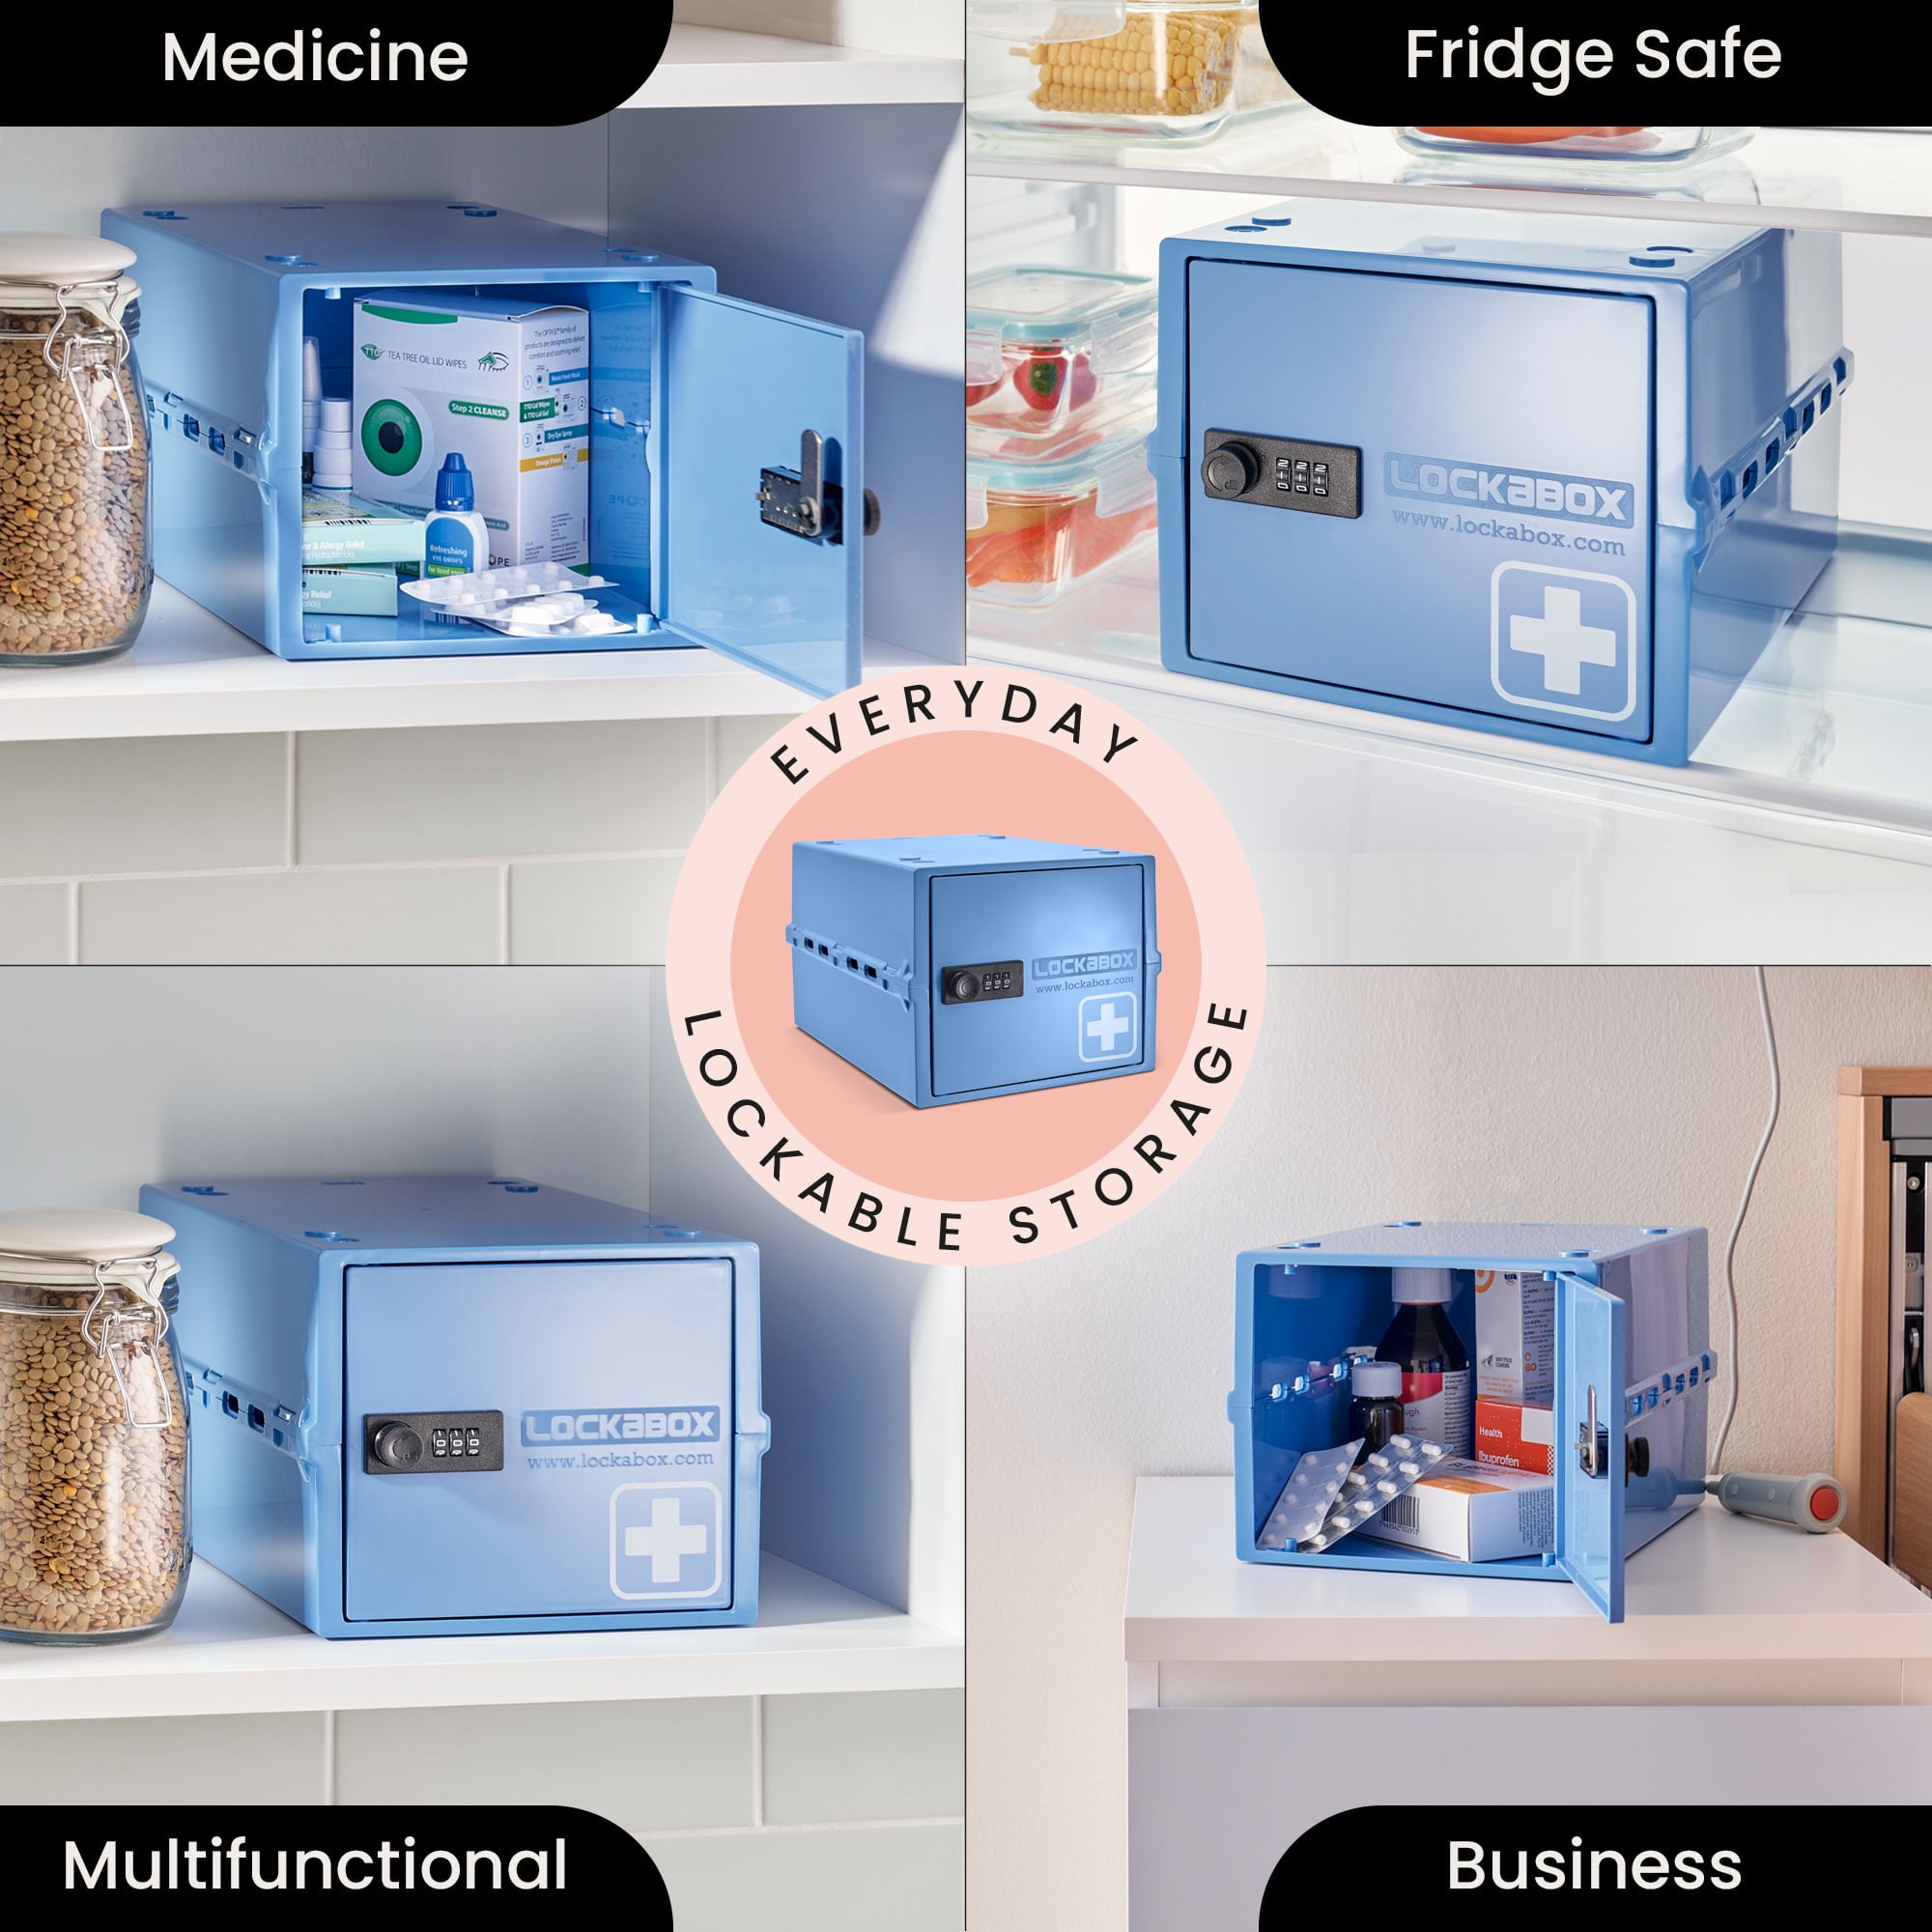 Lockabox One™ | Compact and Hygienic Lockable Storage Box for Food,  Medicines, Tech and Home Safety | One Size 12 x 8 x 6.6 inches externally